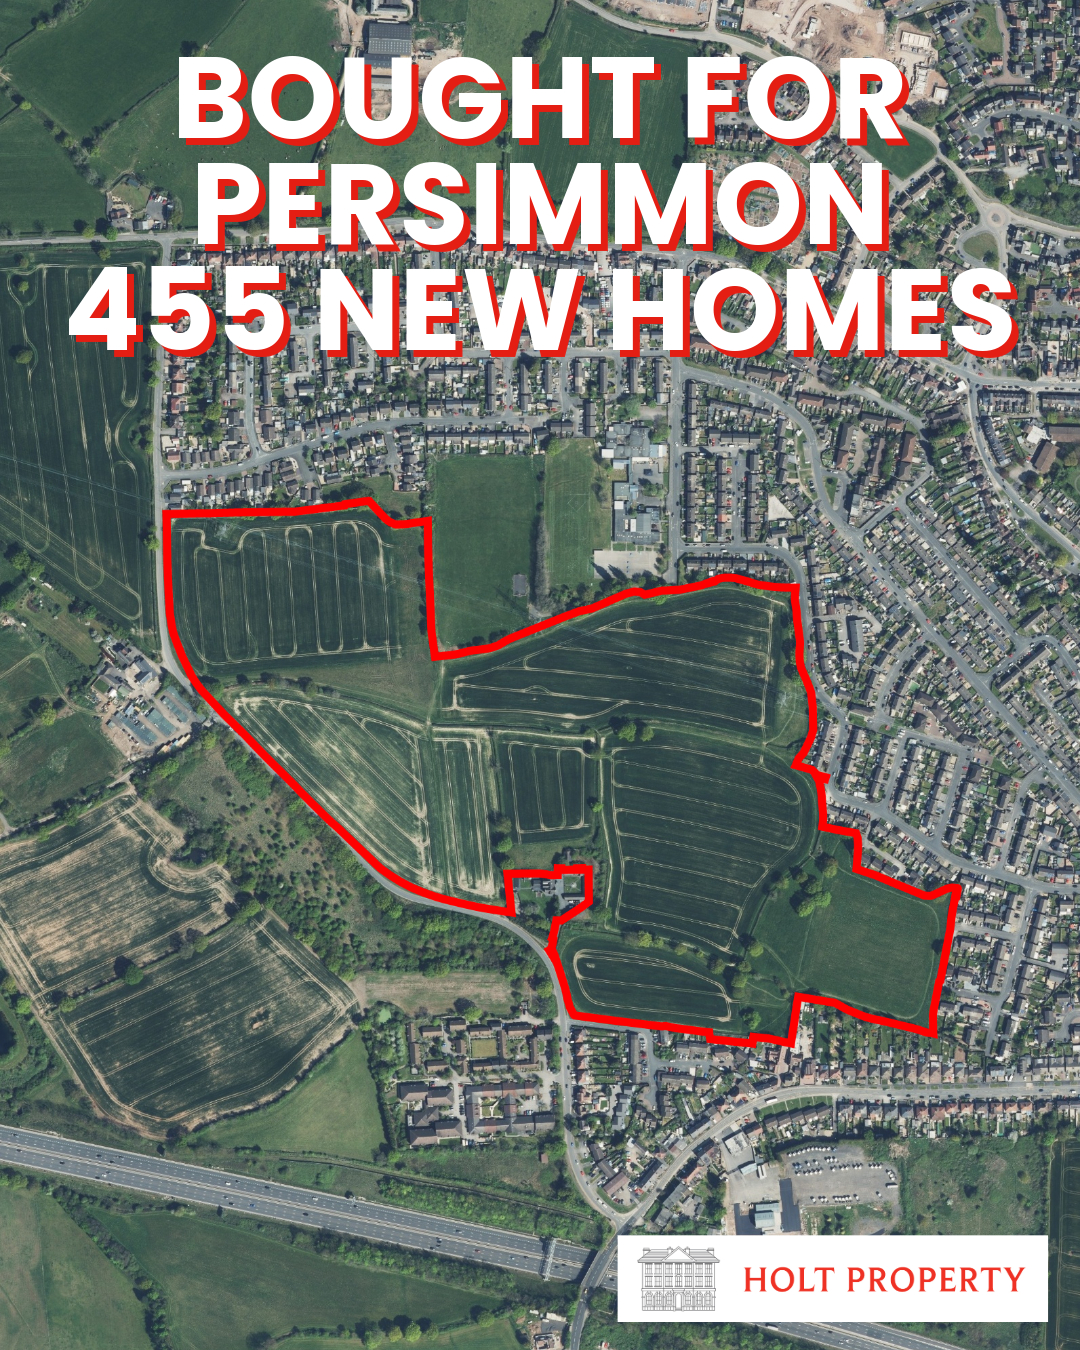 Image for Holt Property Secures 455 Homes & 55 Senior Living Units for Persimmon Homes